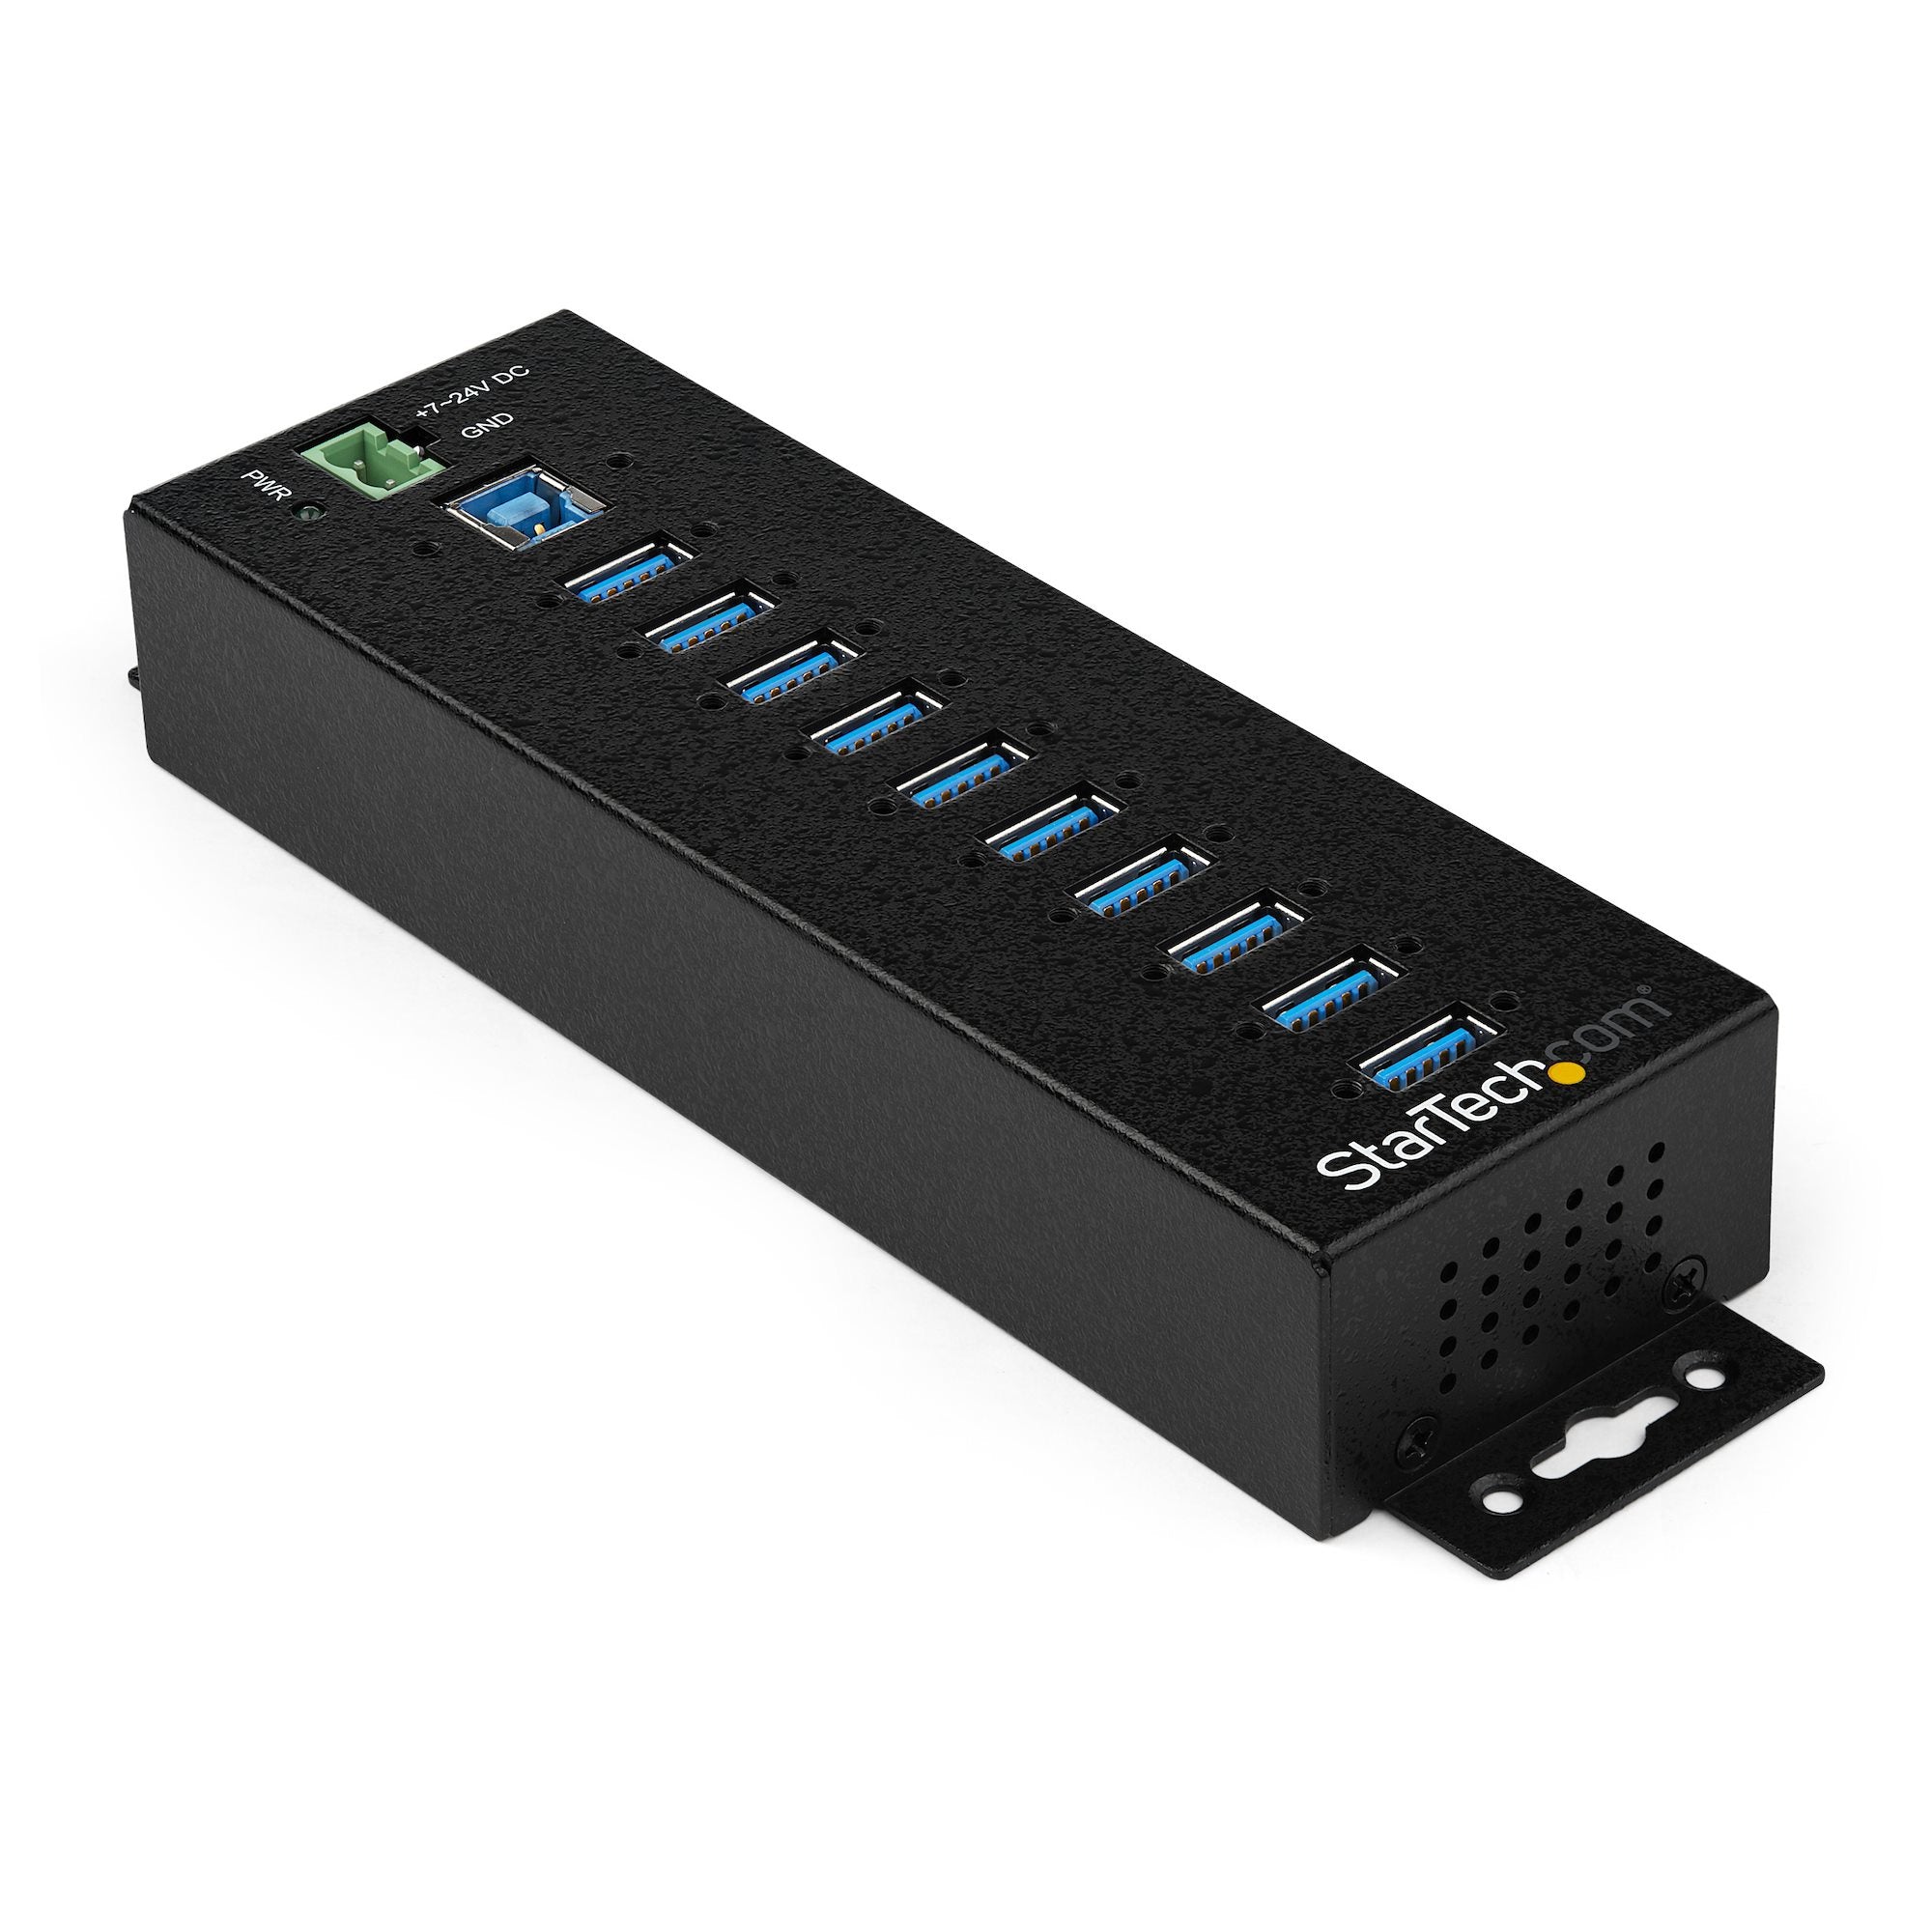 StarTech.com 10-Port USB 3.0 Hub with Power Adapter - Metal Industrial USB-A Hub with ESD & 350W Surge Protection - Din/Wall/Desk Mountable - High Speed USB 3.2 Gen 1 (5Gbps) Hub